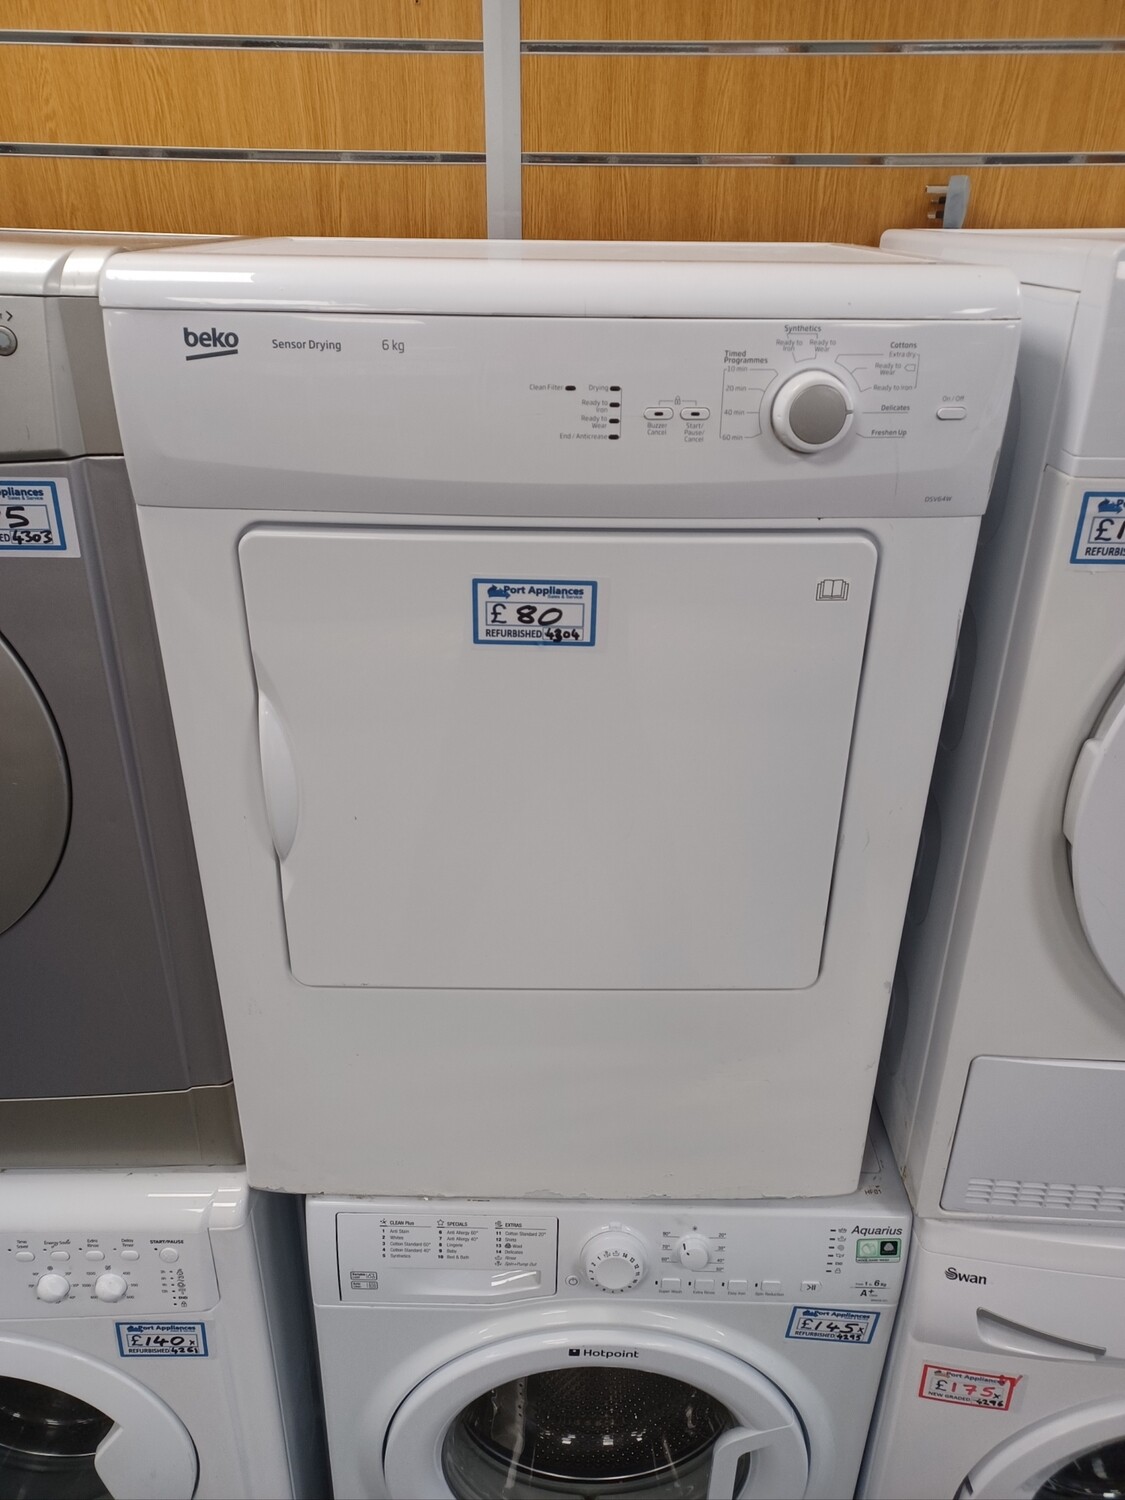 Beko 6kg Vented Dryer White Refurbished 6 Months Guarantee. Located In our Whitby Road Shop